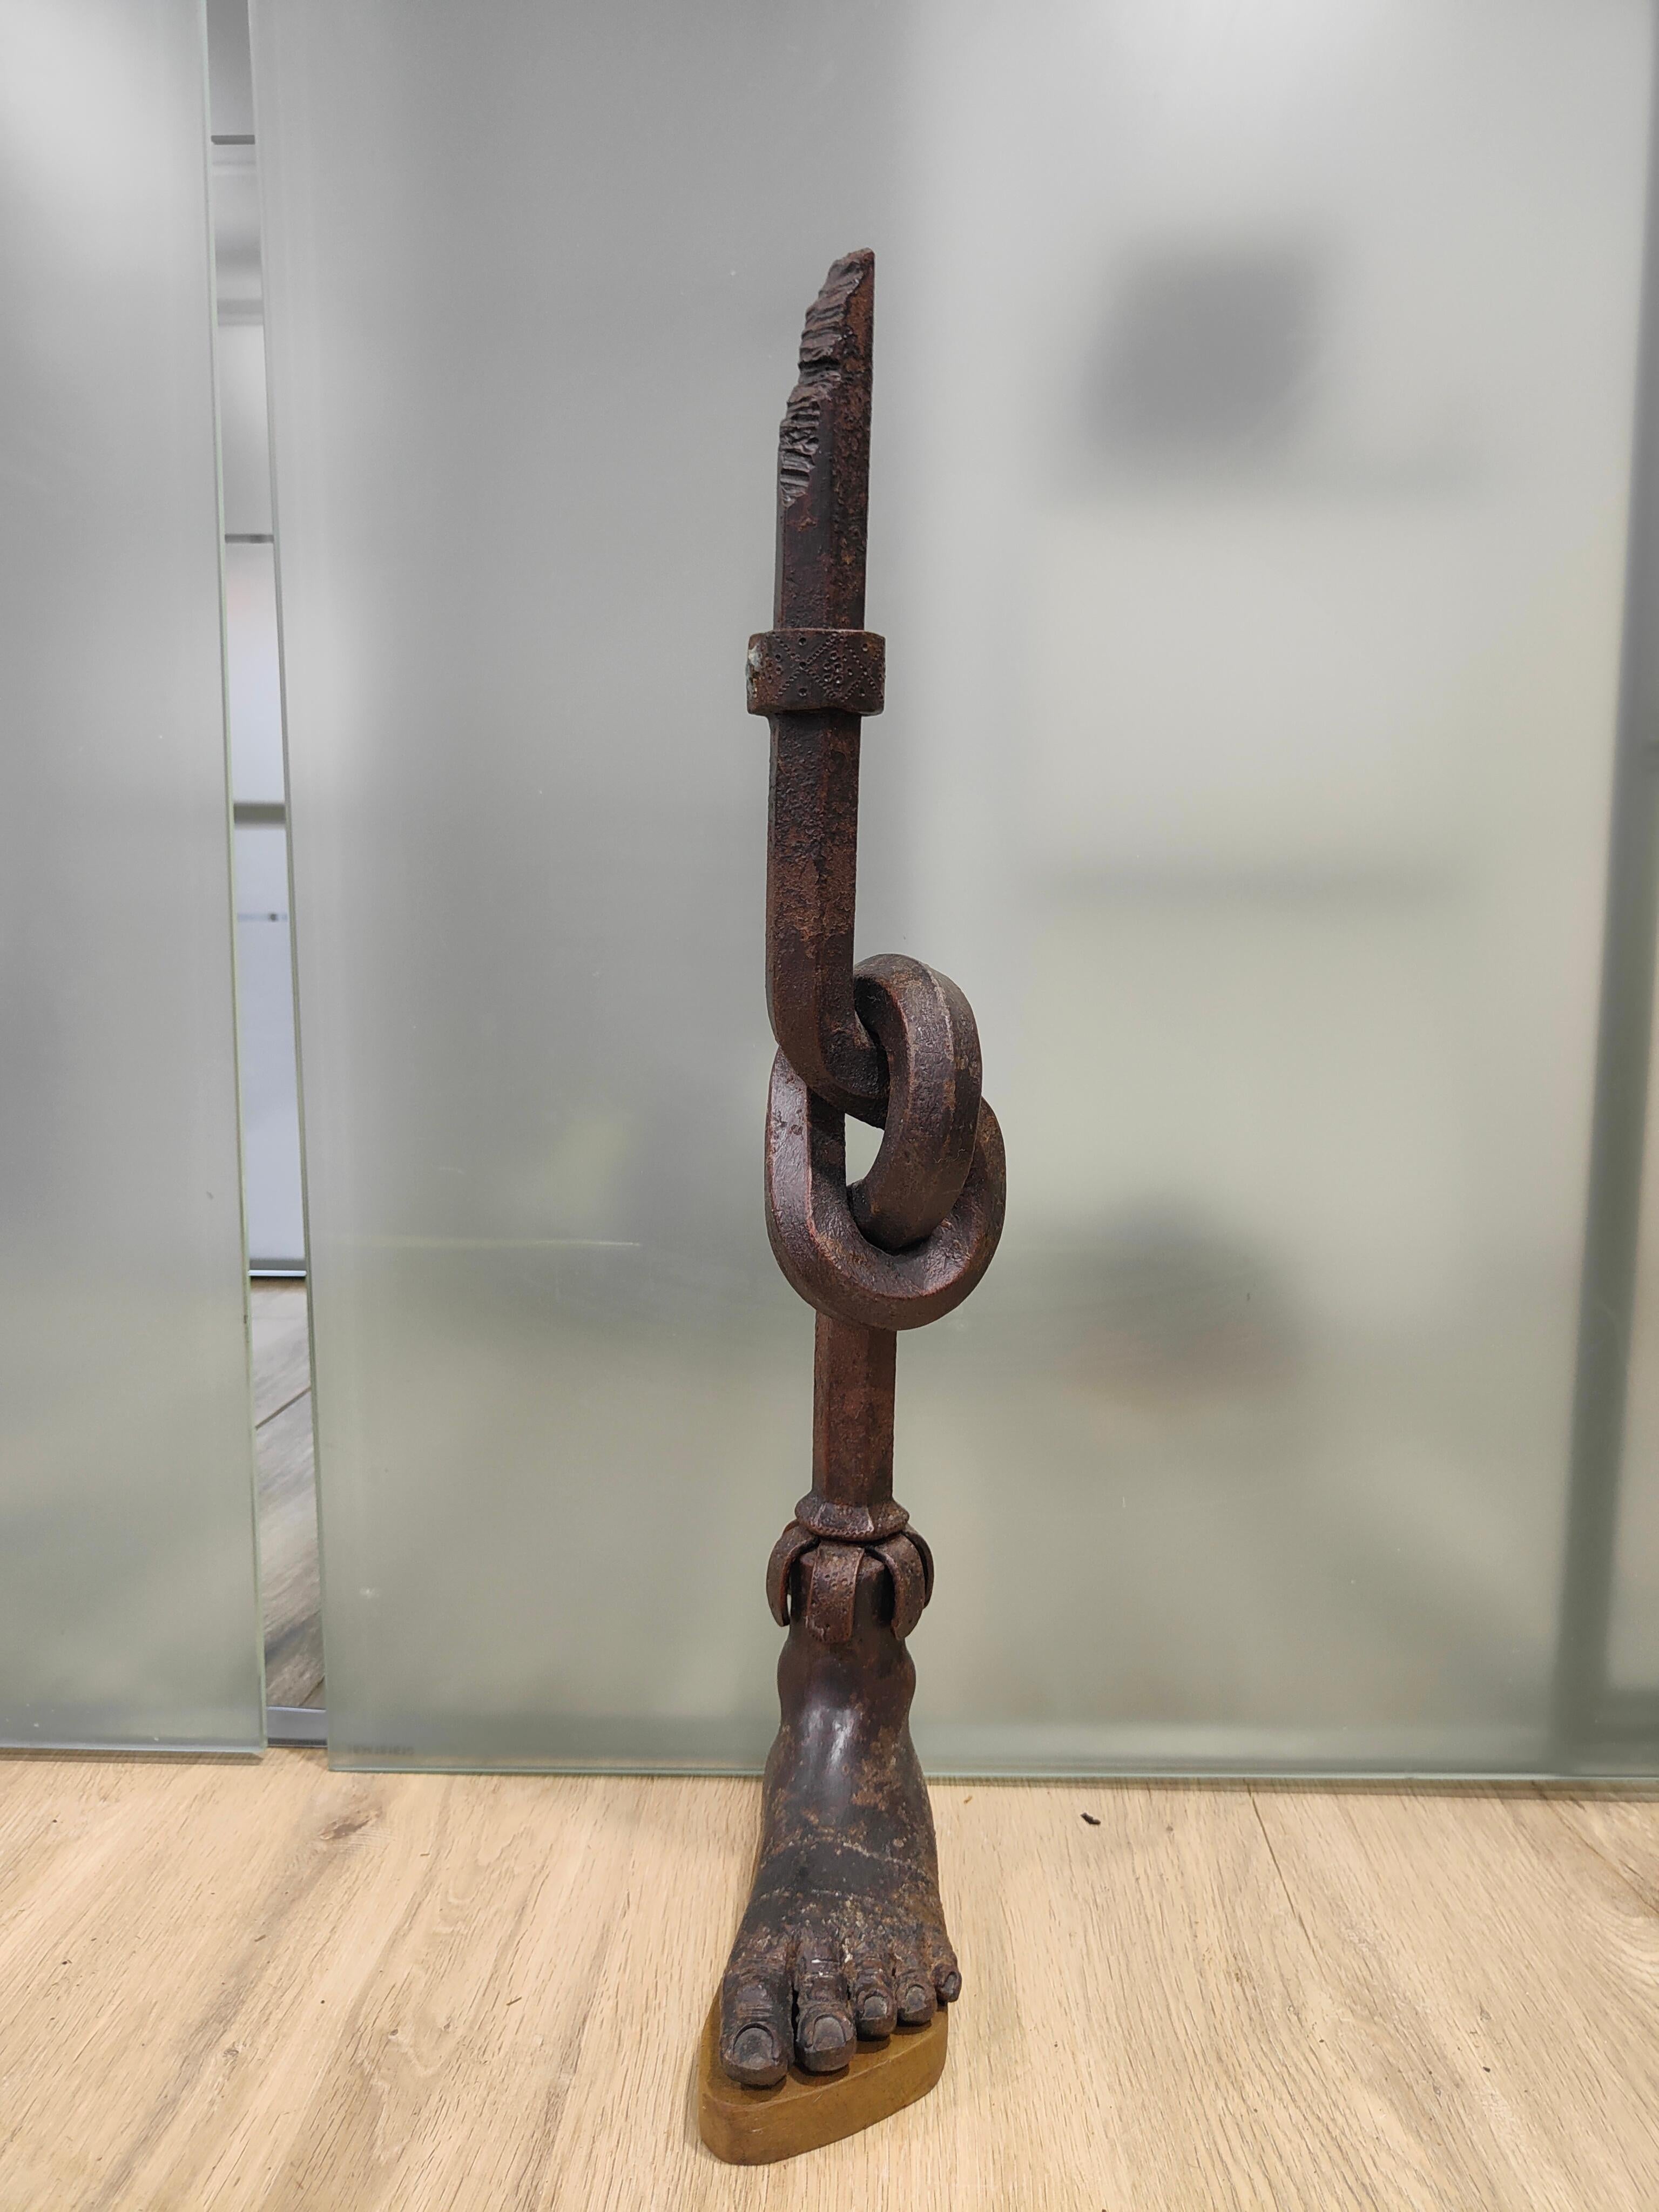  70 cm Forged Iron Sculpture - Elegant Artisan-Crafted Work at the Forge  For Sale 6